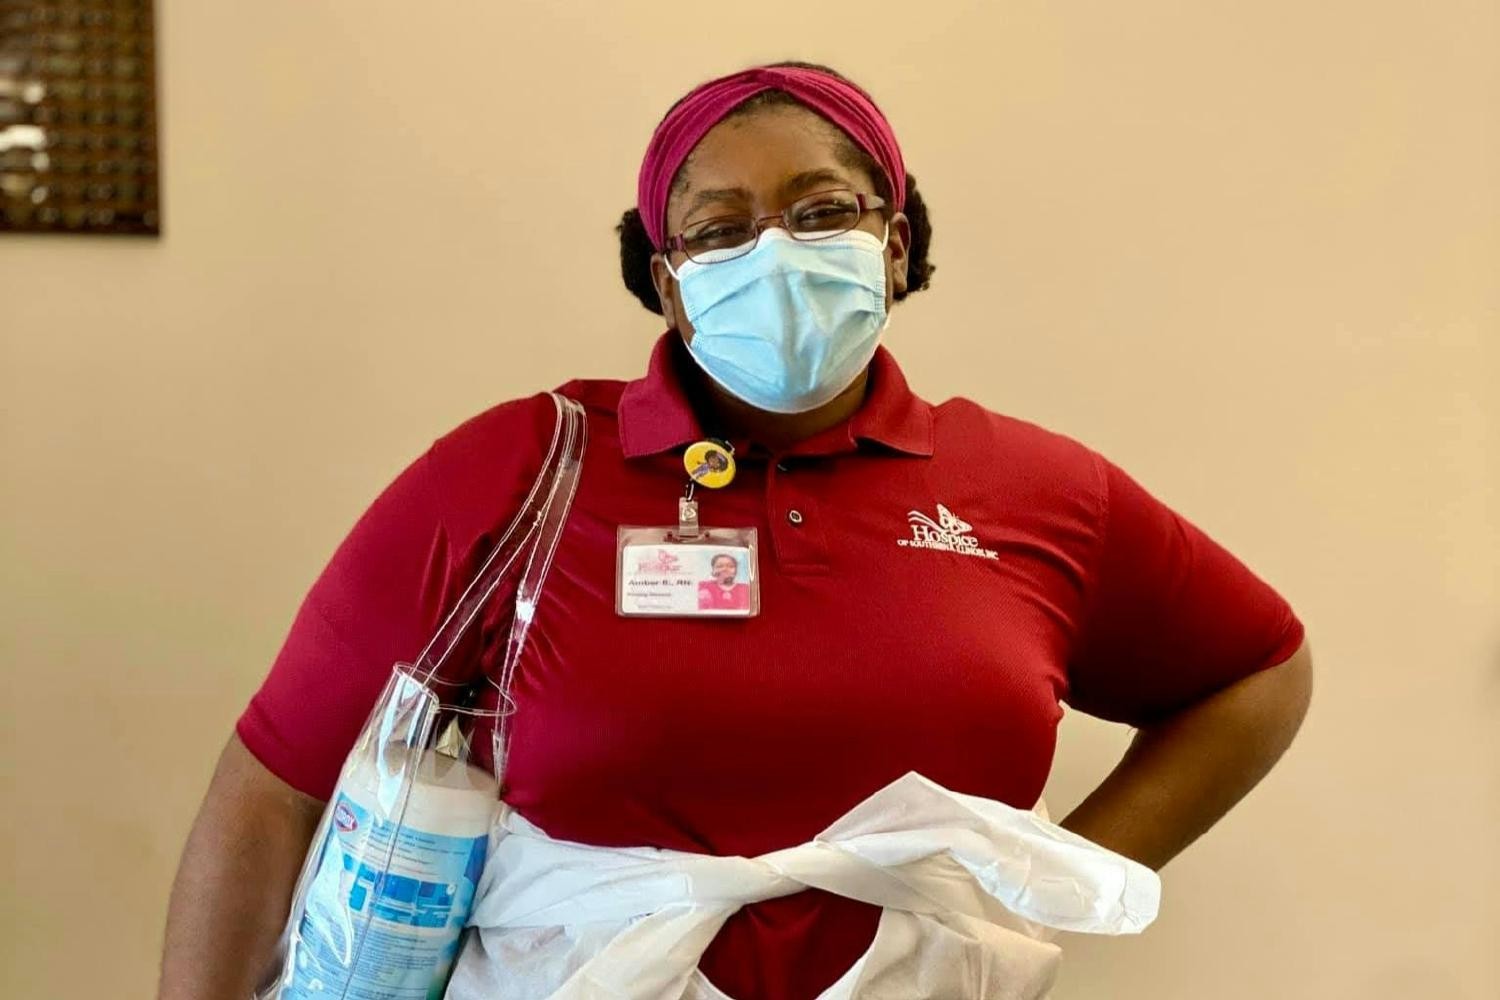 Our nurses are pandemic prepared and here to serve our patients!